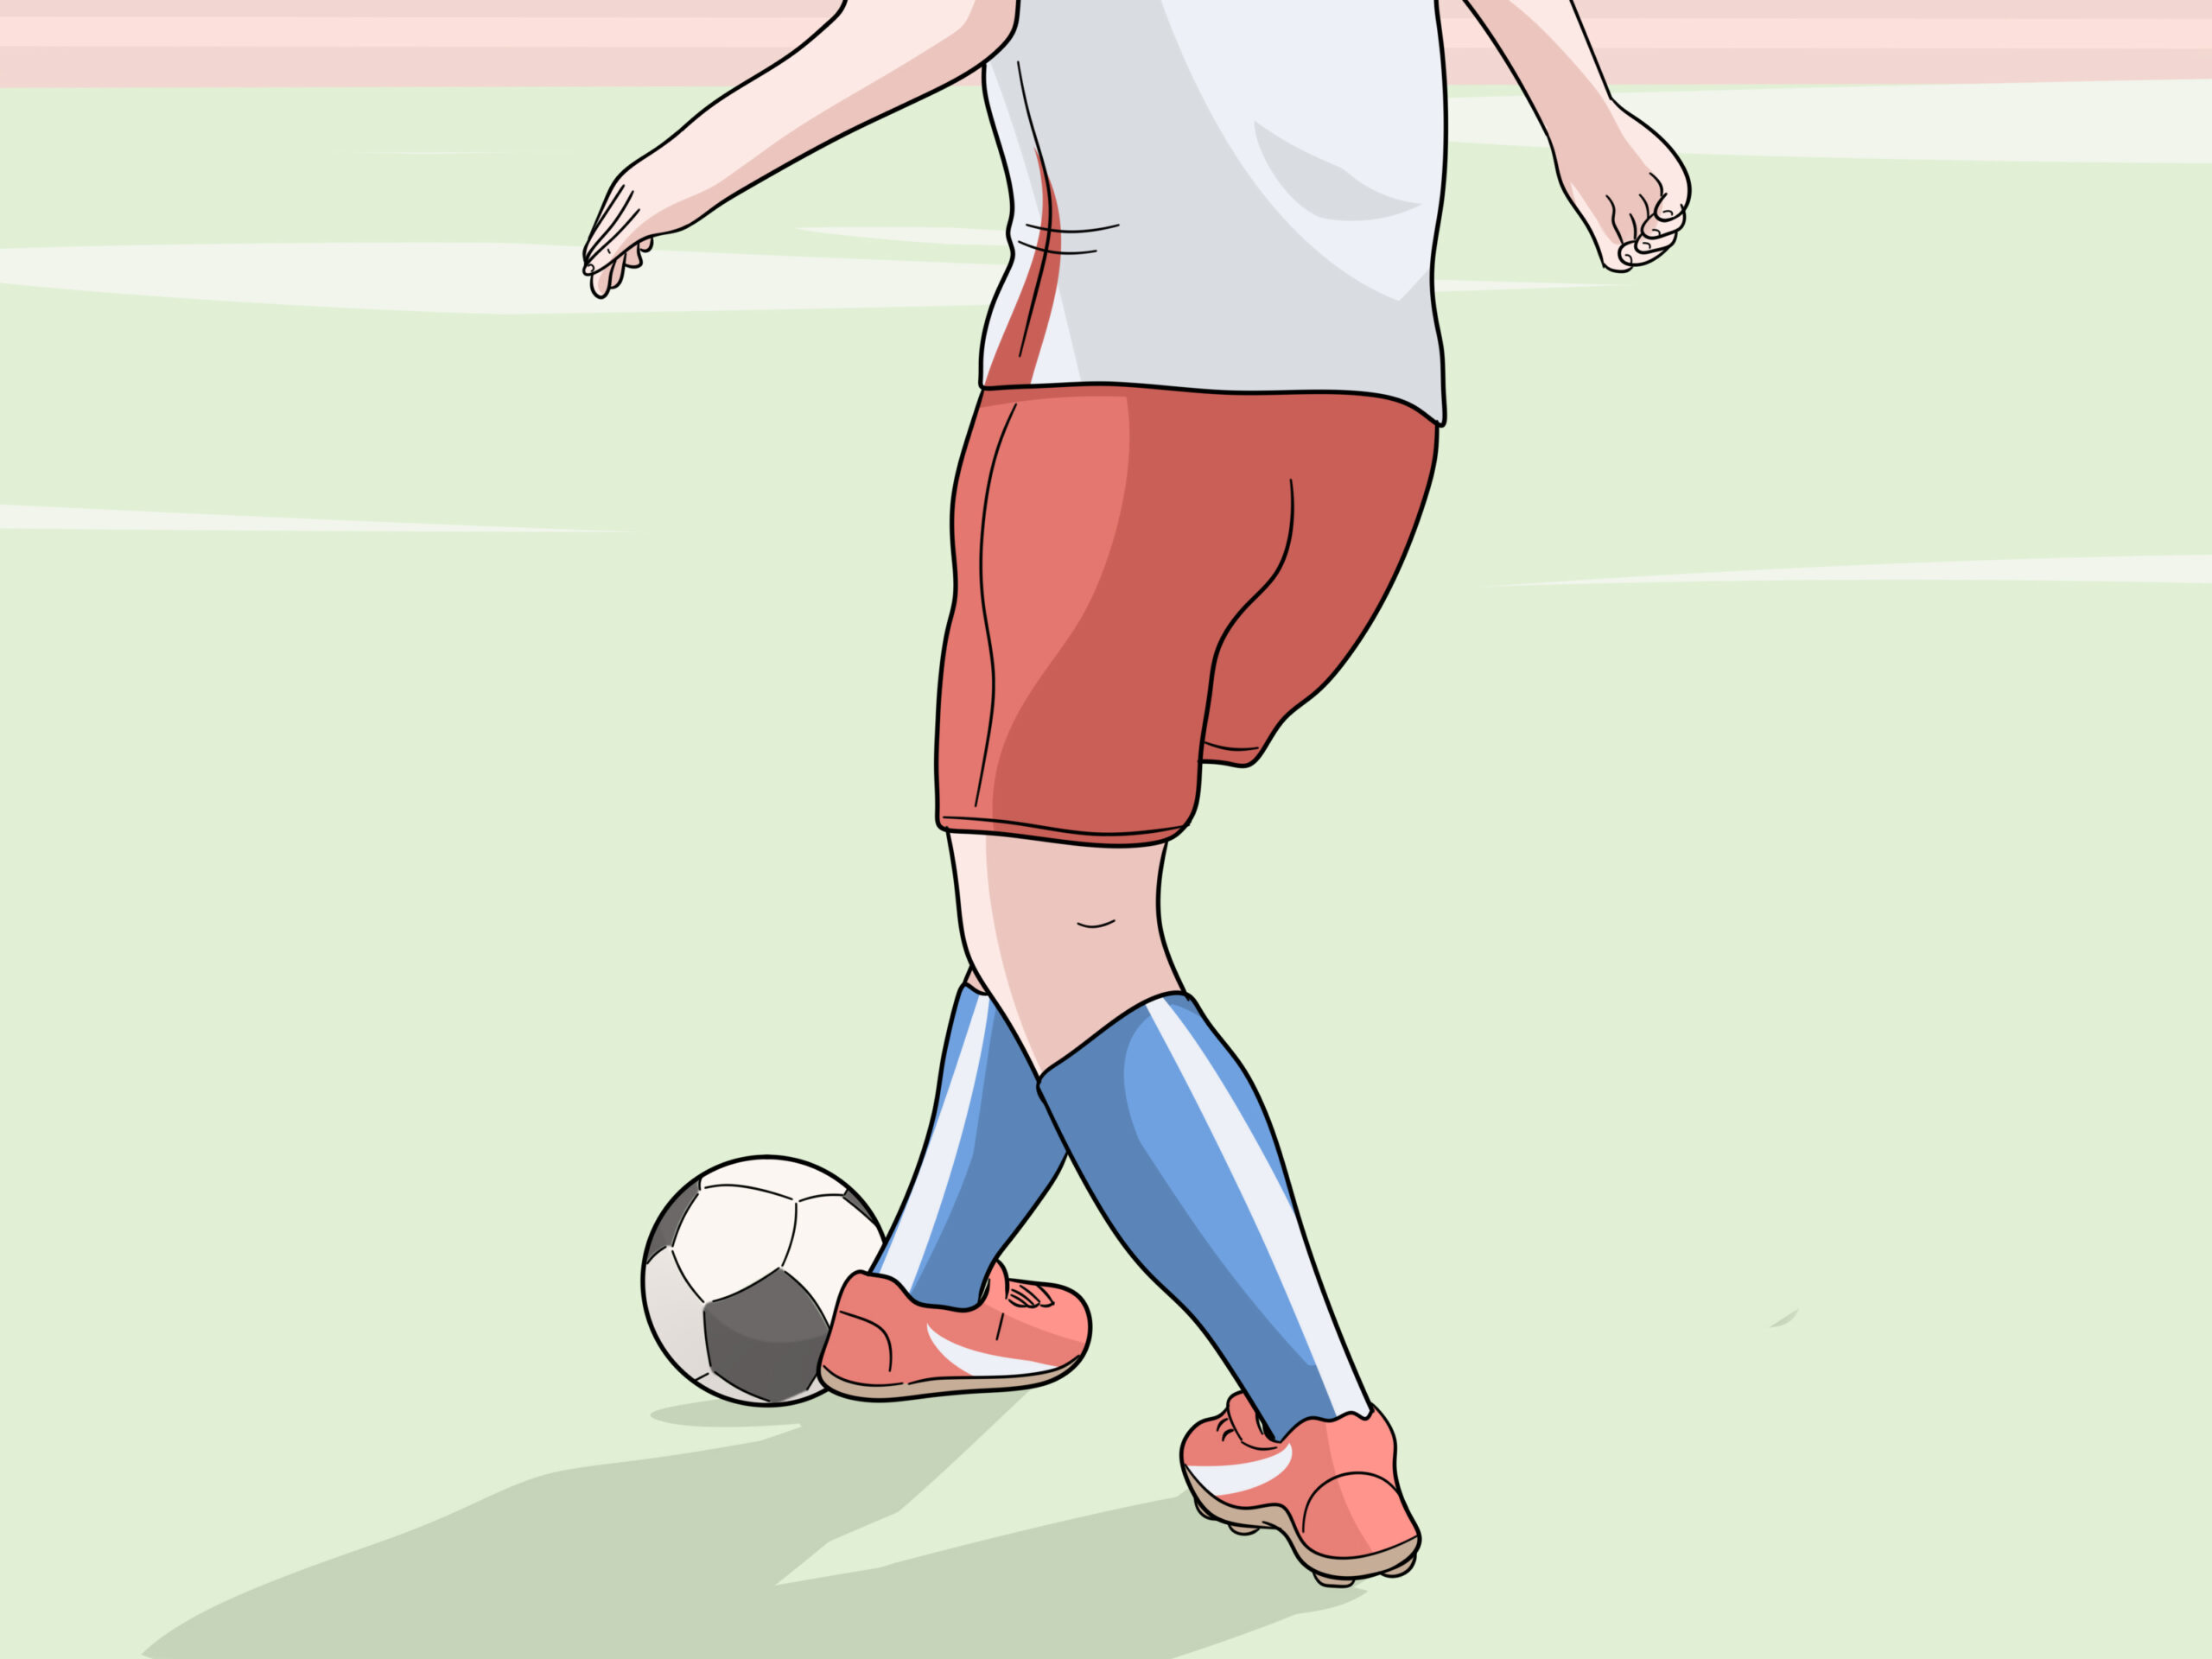 how to pass the soccer ball